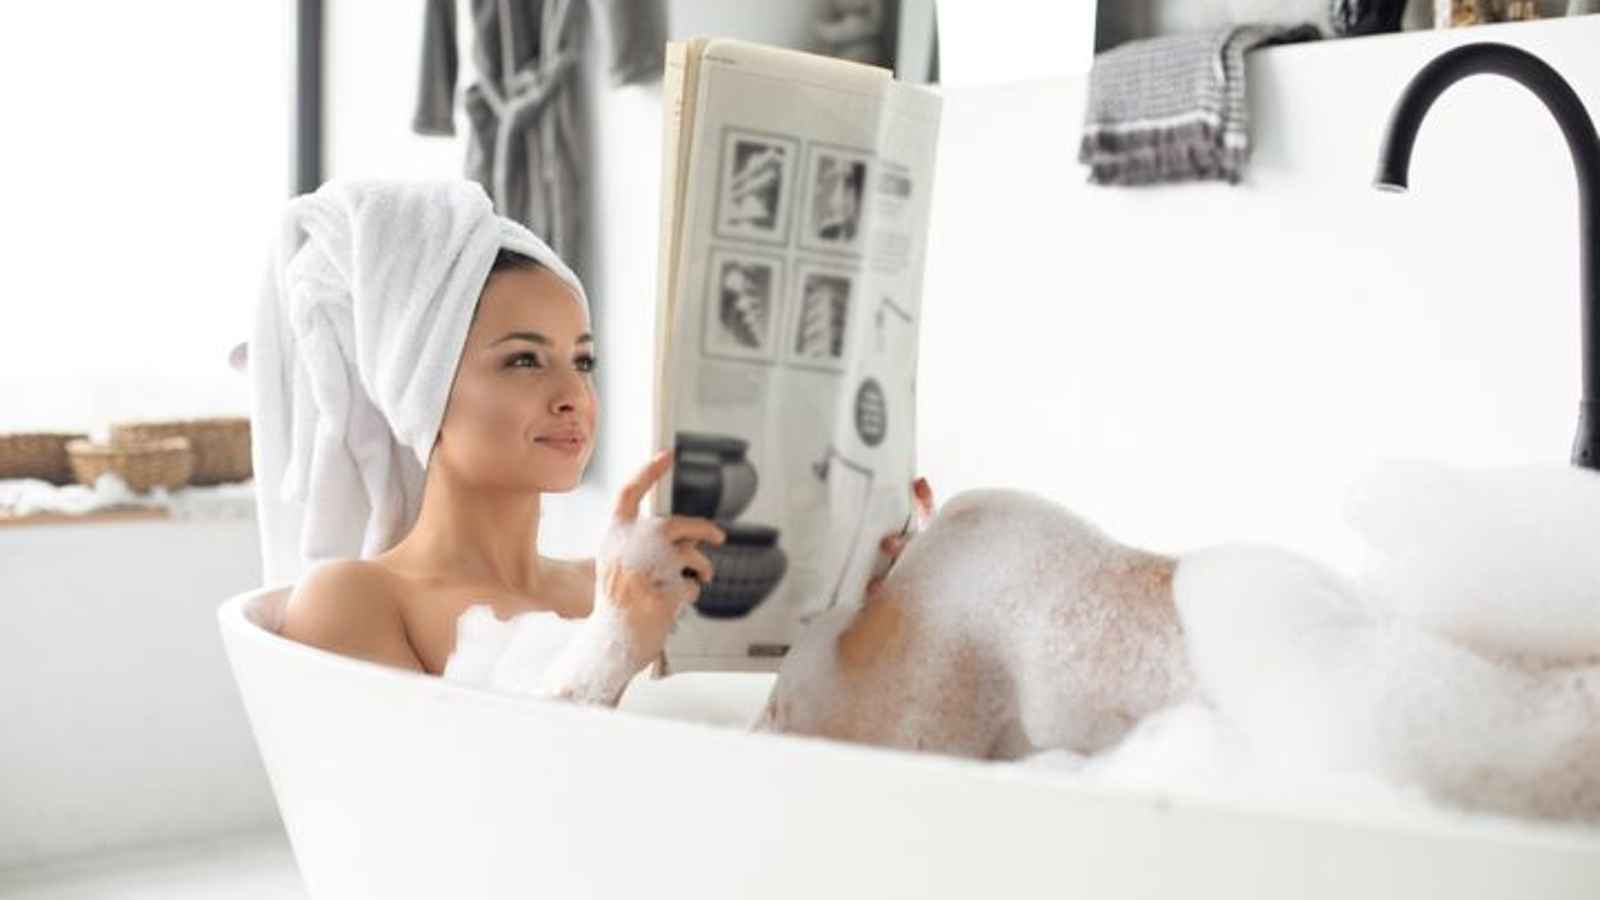 International Bath Day 2023: Date, History, Facts about Bathroom